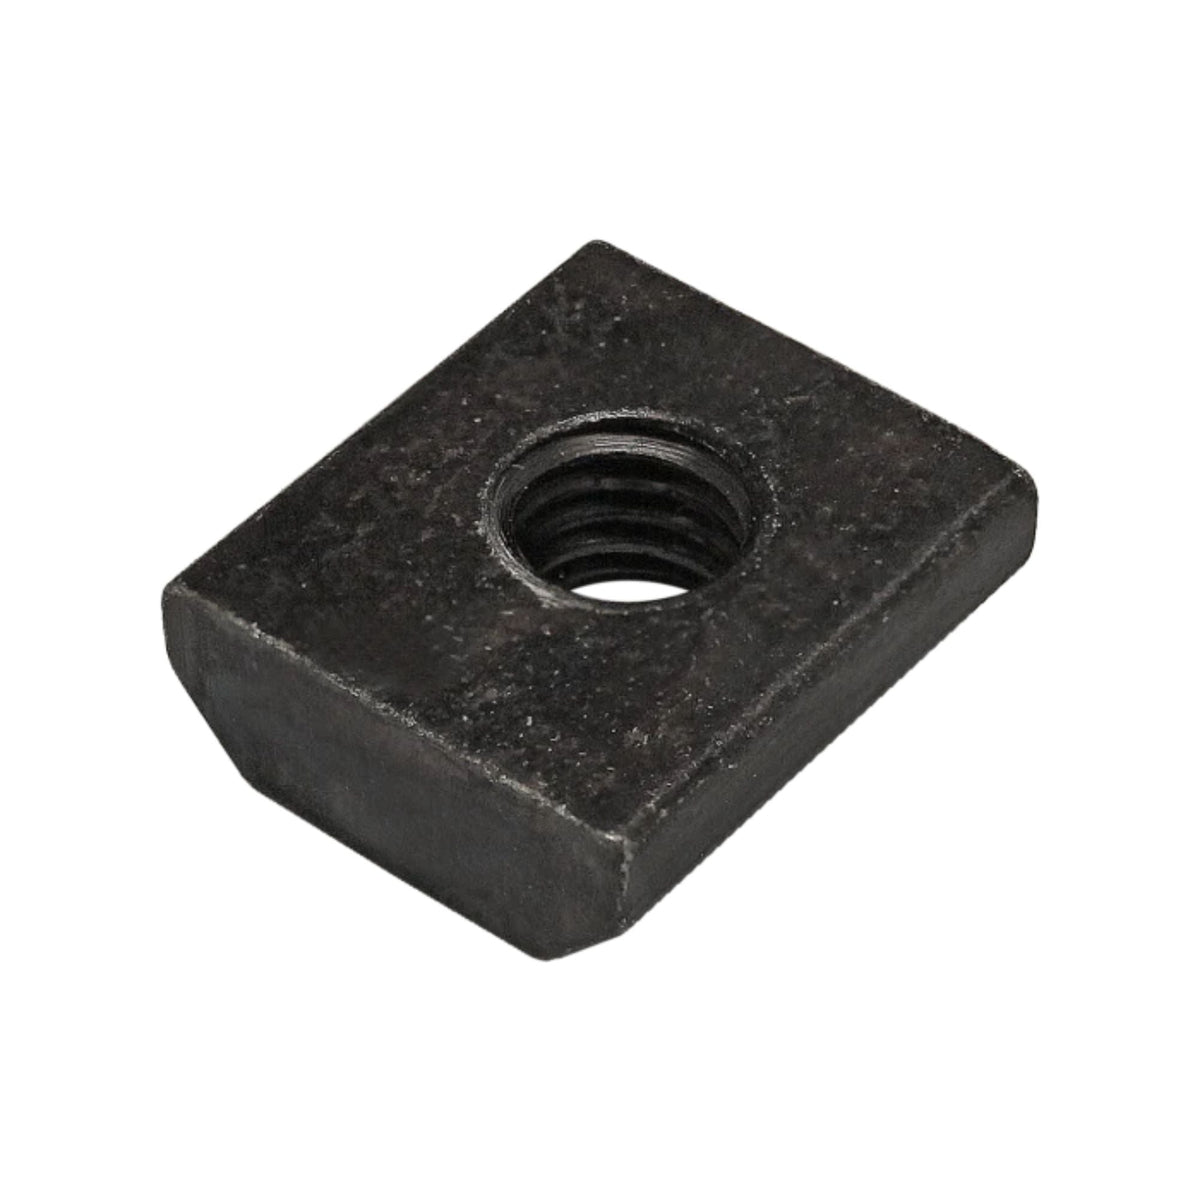 black, metal, square t-nut with a rounded bo0ttom and a threaded hole in the top